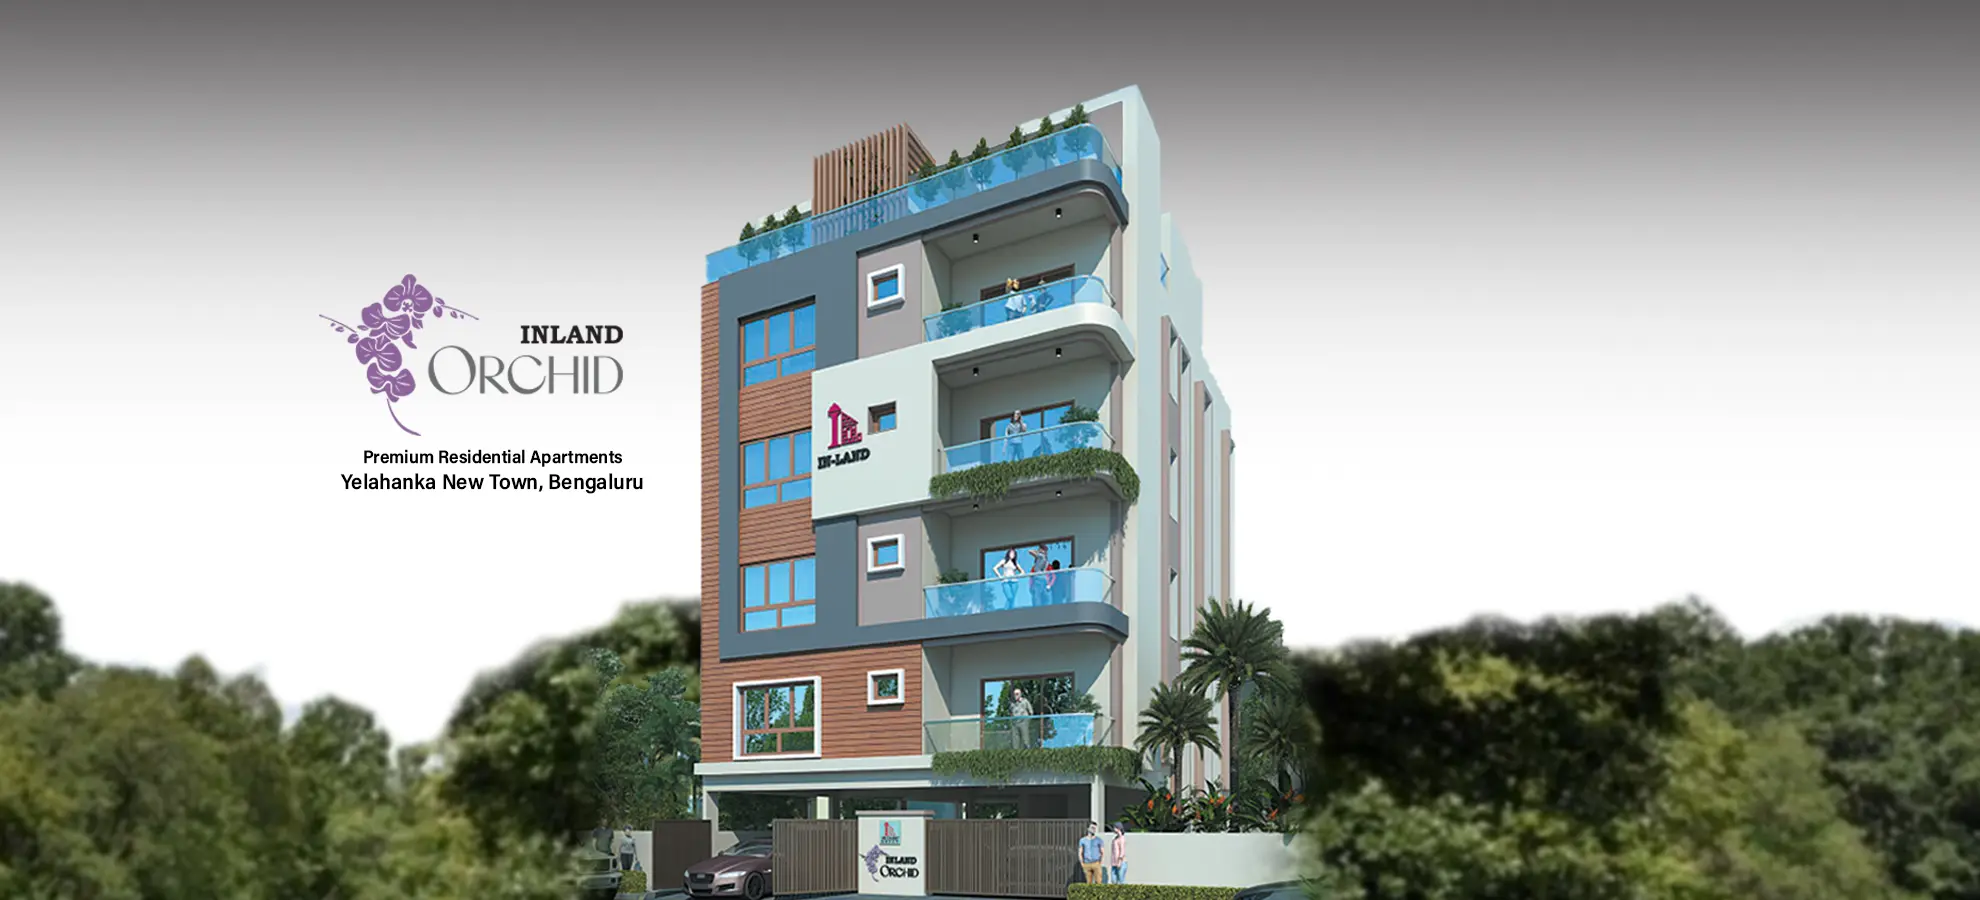 IN-LAND Orchid - Residential Project in Yelahanka New Town, Bengaluru